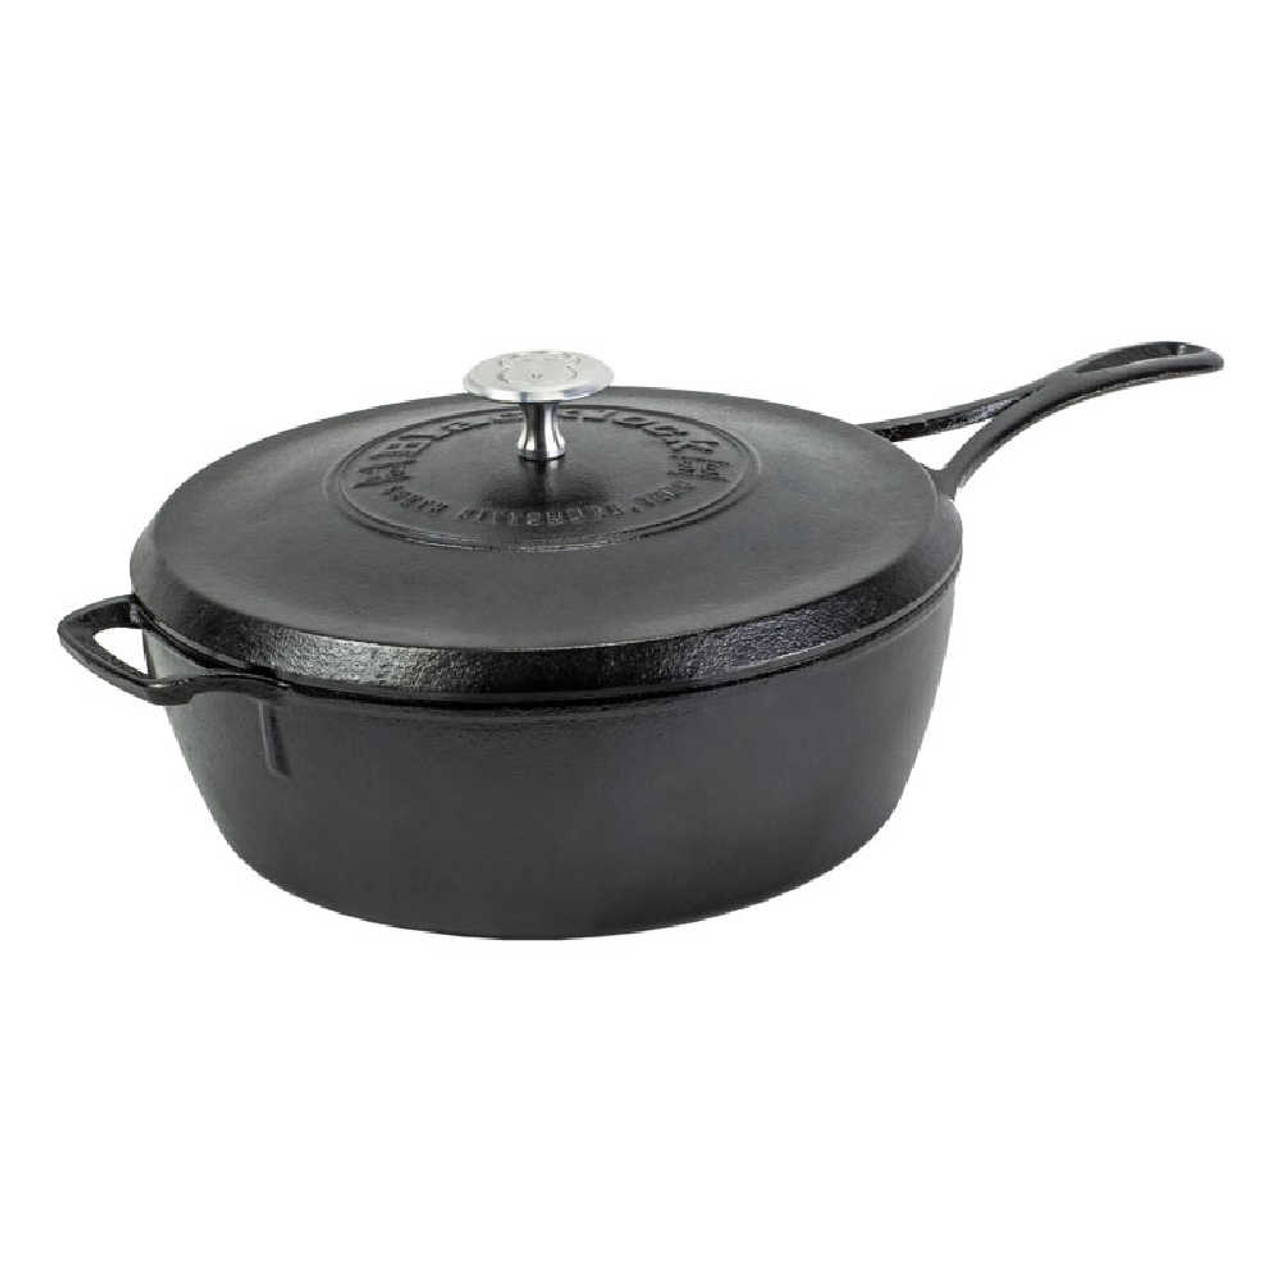 https://cdn11.bigcommerce.com/s-hccytny0od/images/stencil/1280x1280/products/4786/19509/Lodge_Blacklock_Cast_Iron_Deep_Skillet_With_Lid__49605.1654635334.jpg?c=2?imbypass=on